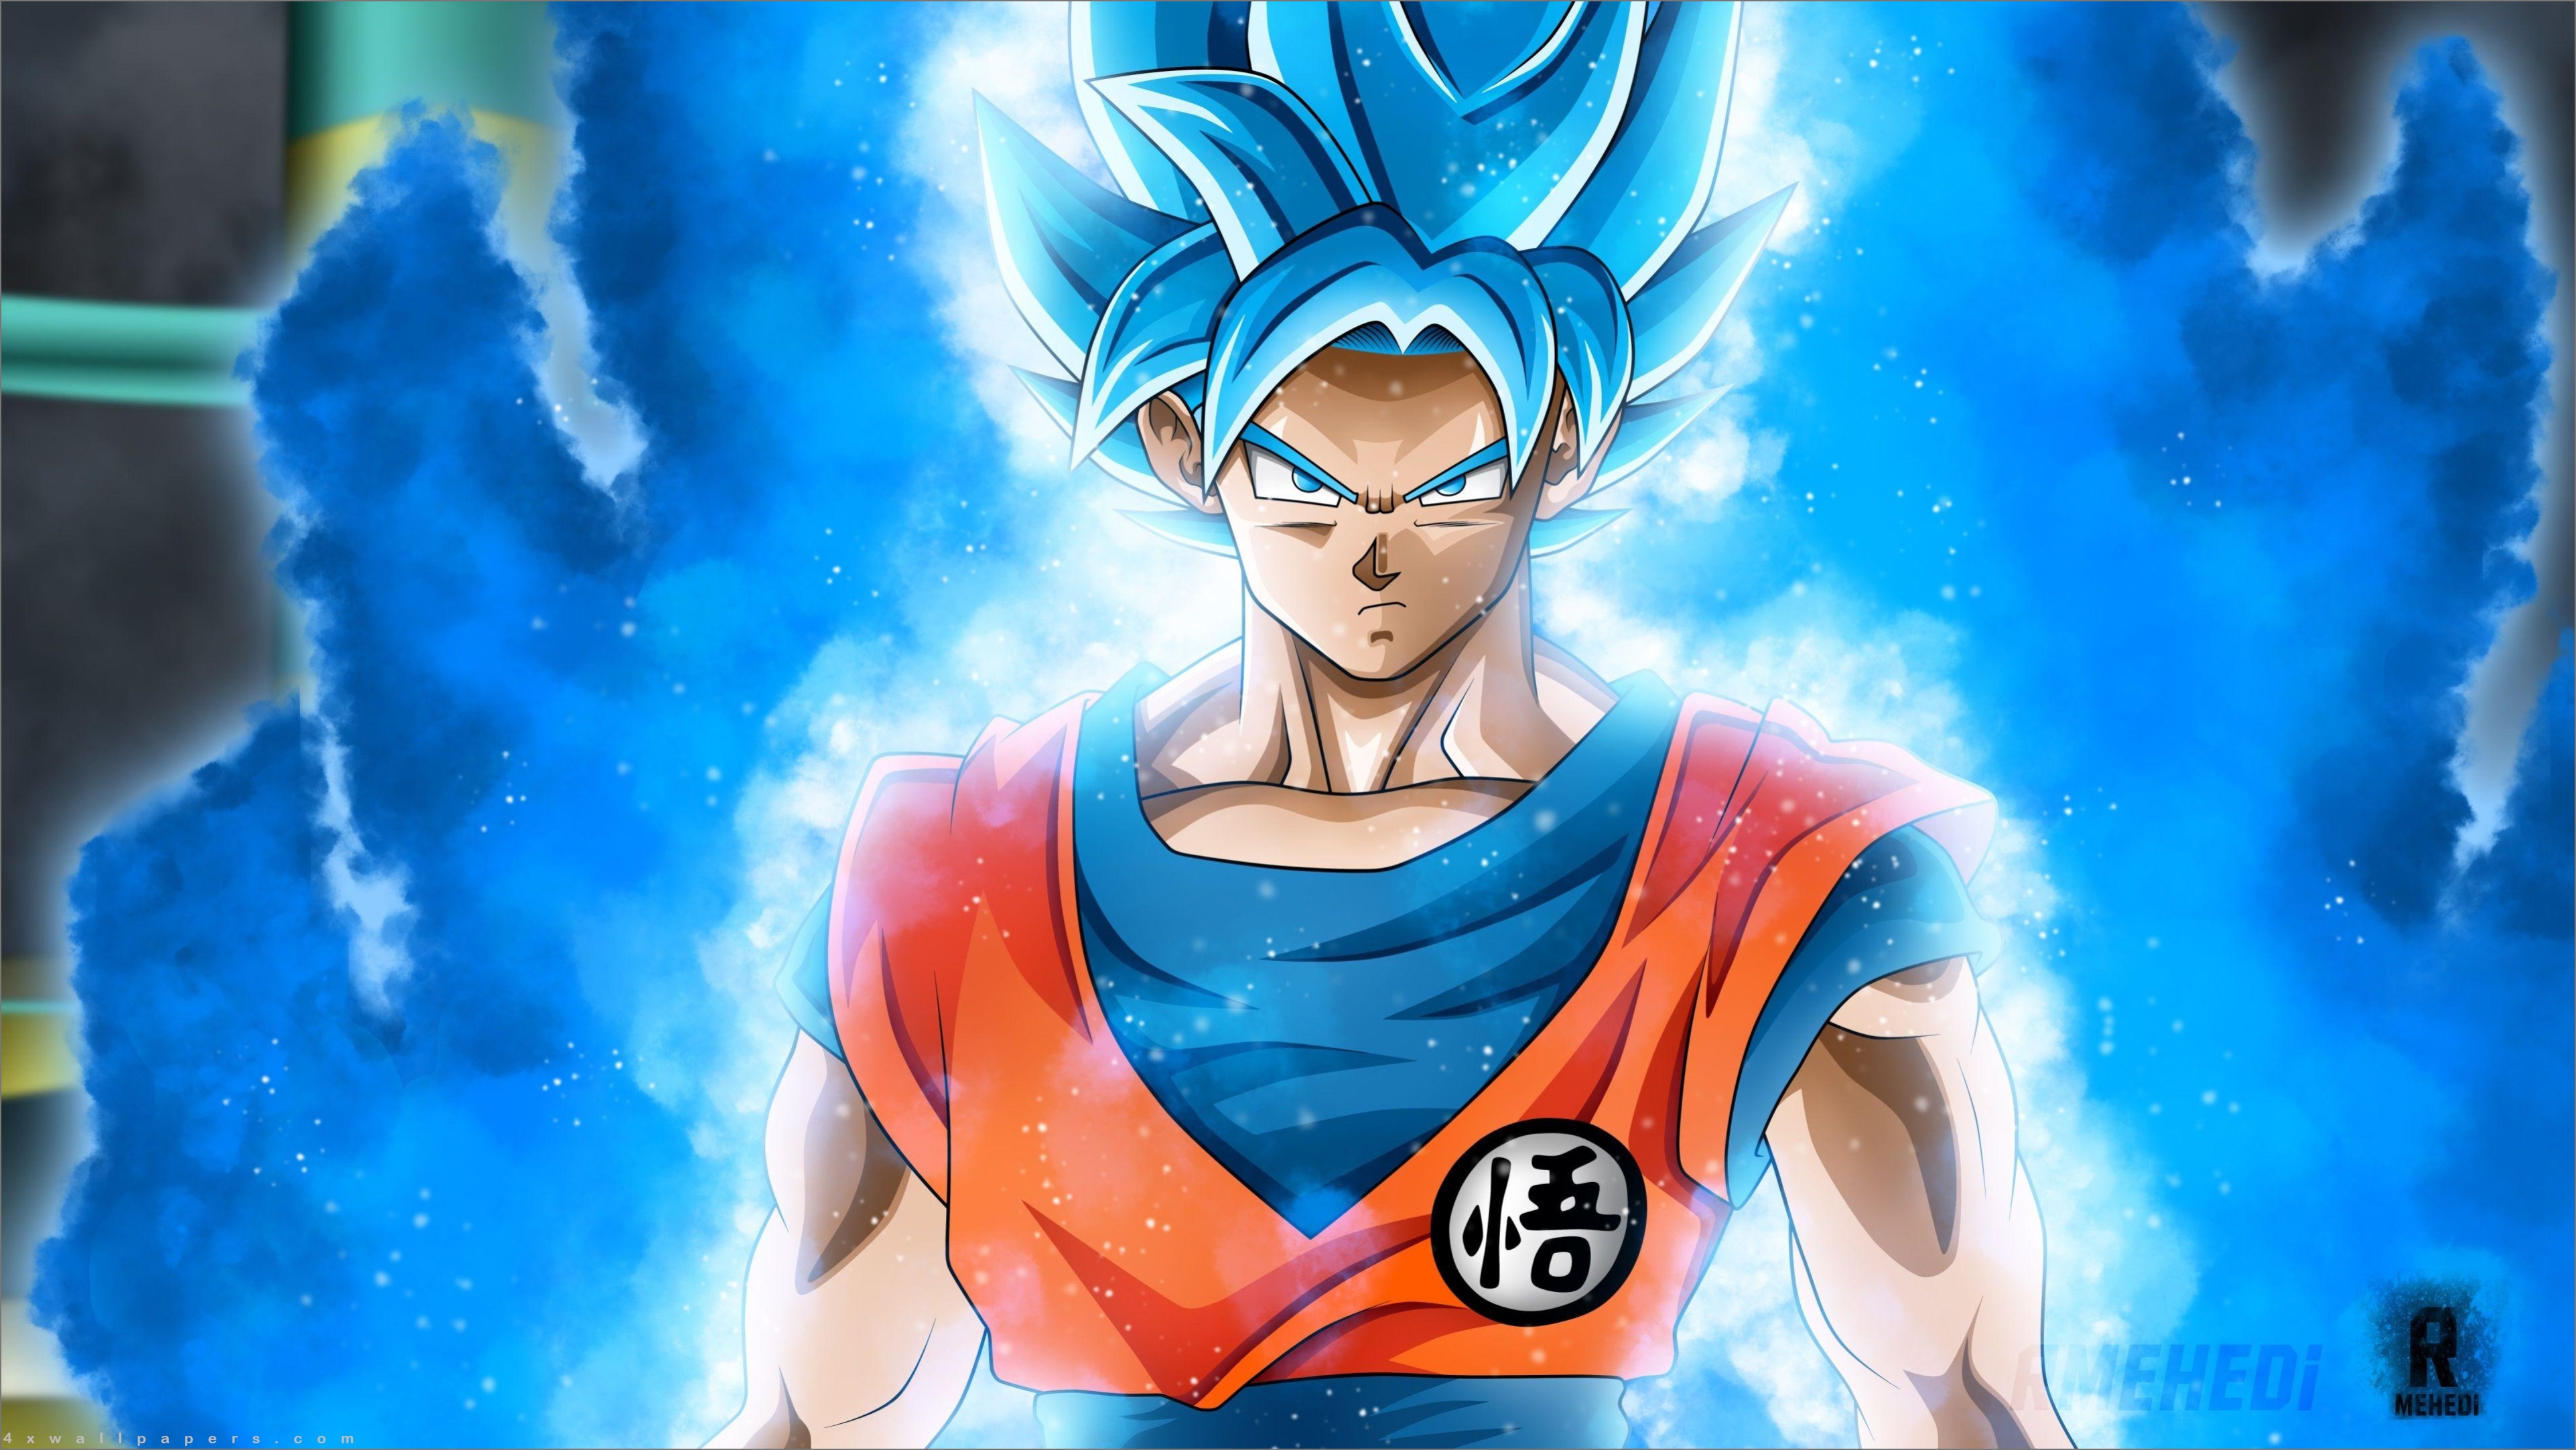 Dragon Ball Z Goku Wallpapers Is Powerful, Cool For Phone, PC